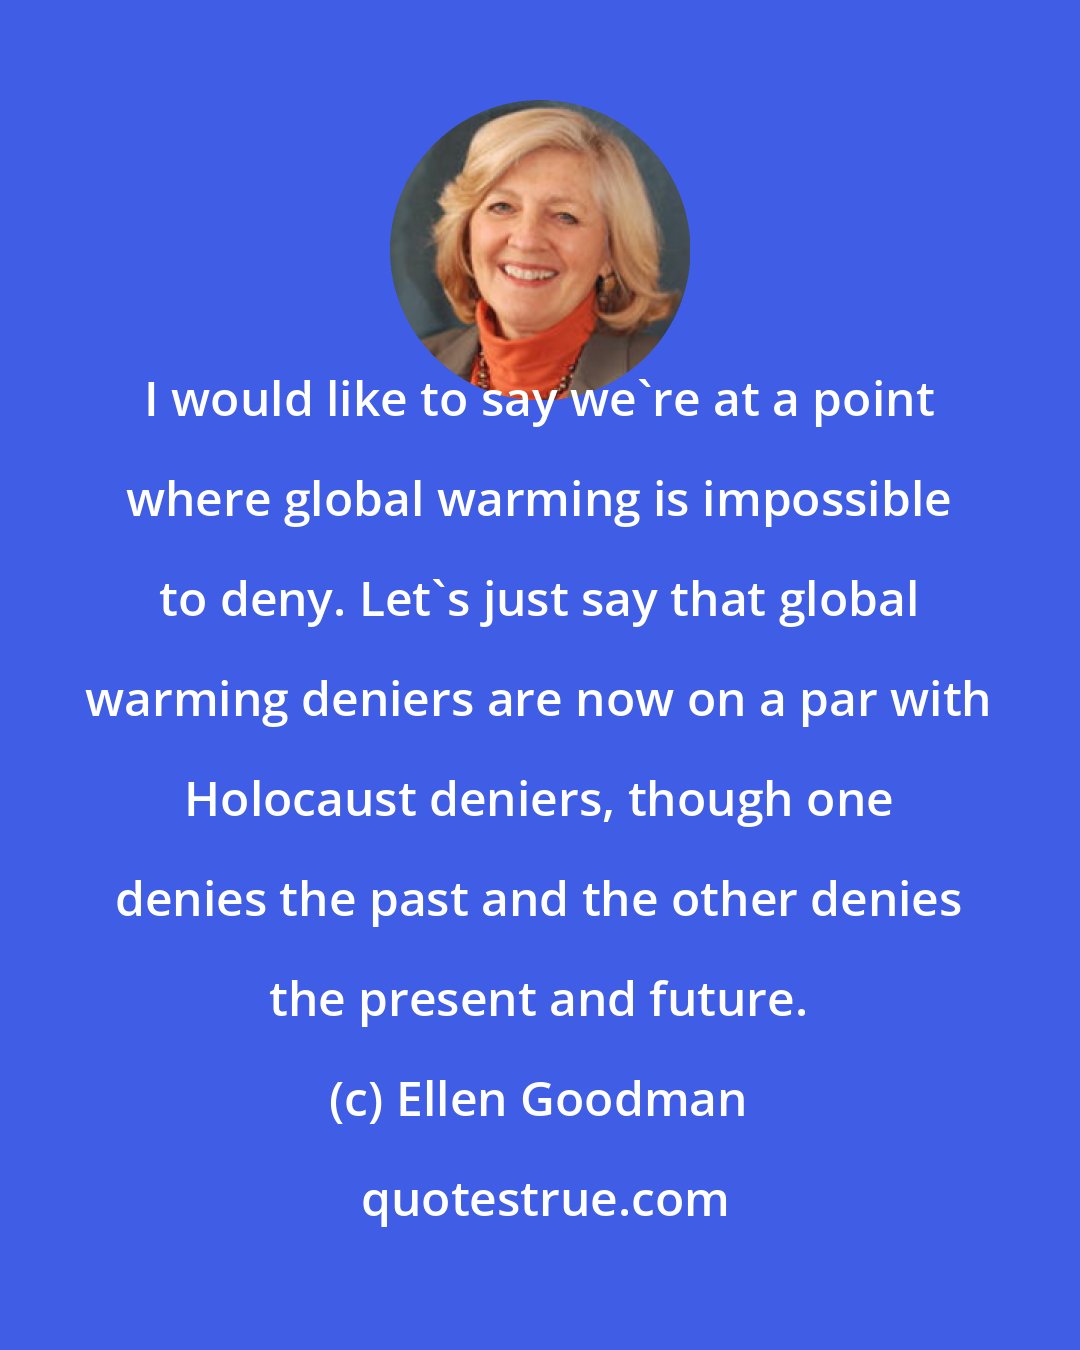 Ellen Goodman: I would like to say we're at a point where global warming is impossible to deny. Let's just say that global warming deniers are now on a par with Holocaust deniers, though one denies the past and the other denies the present and future.